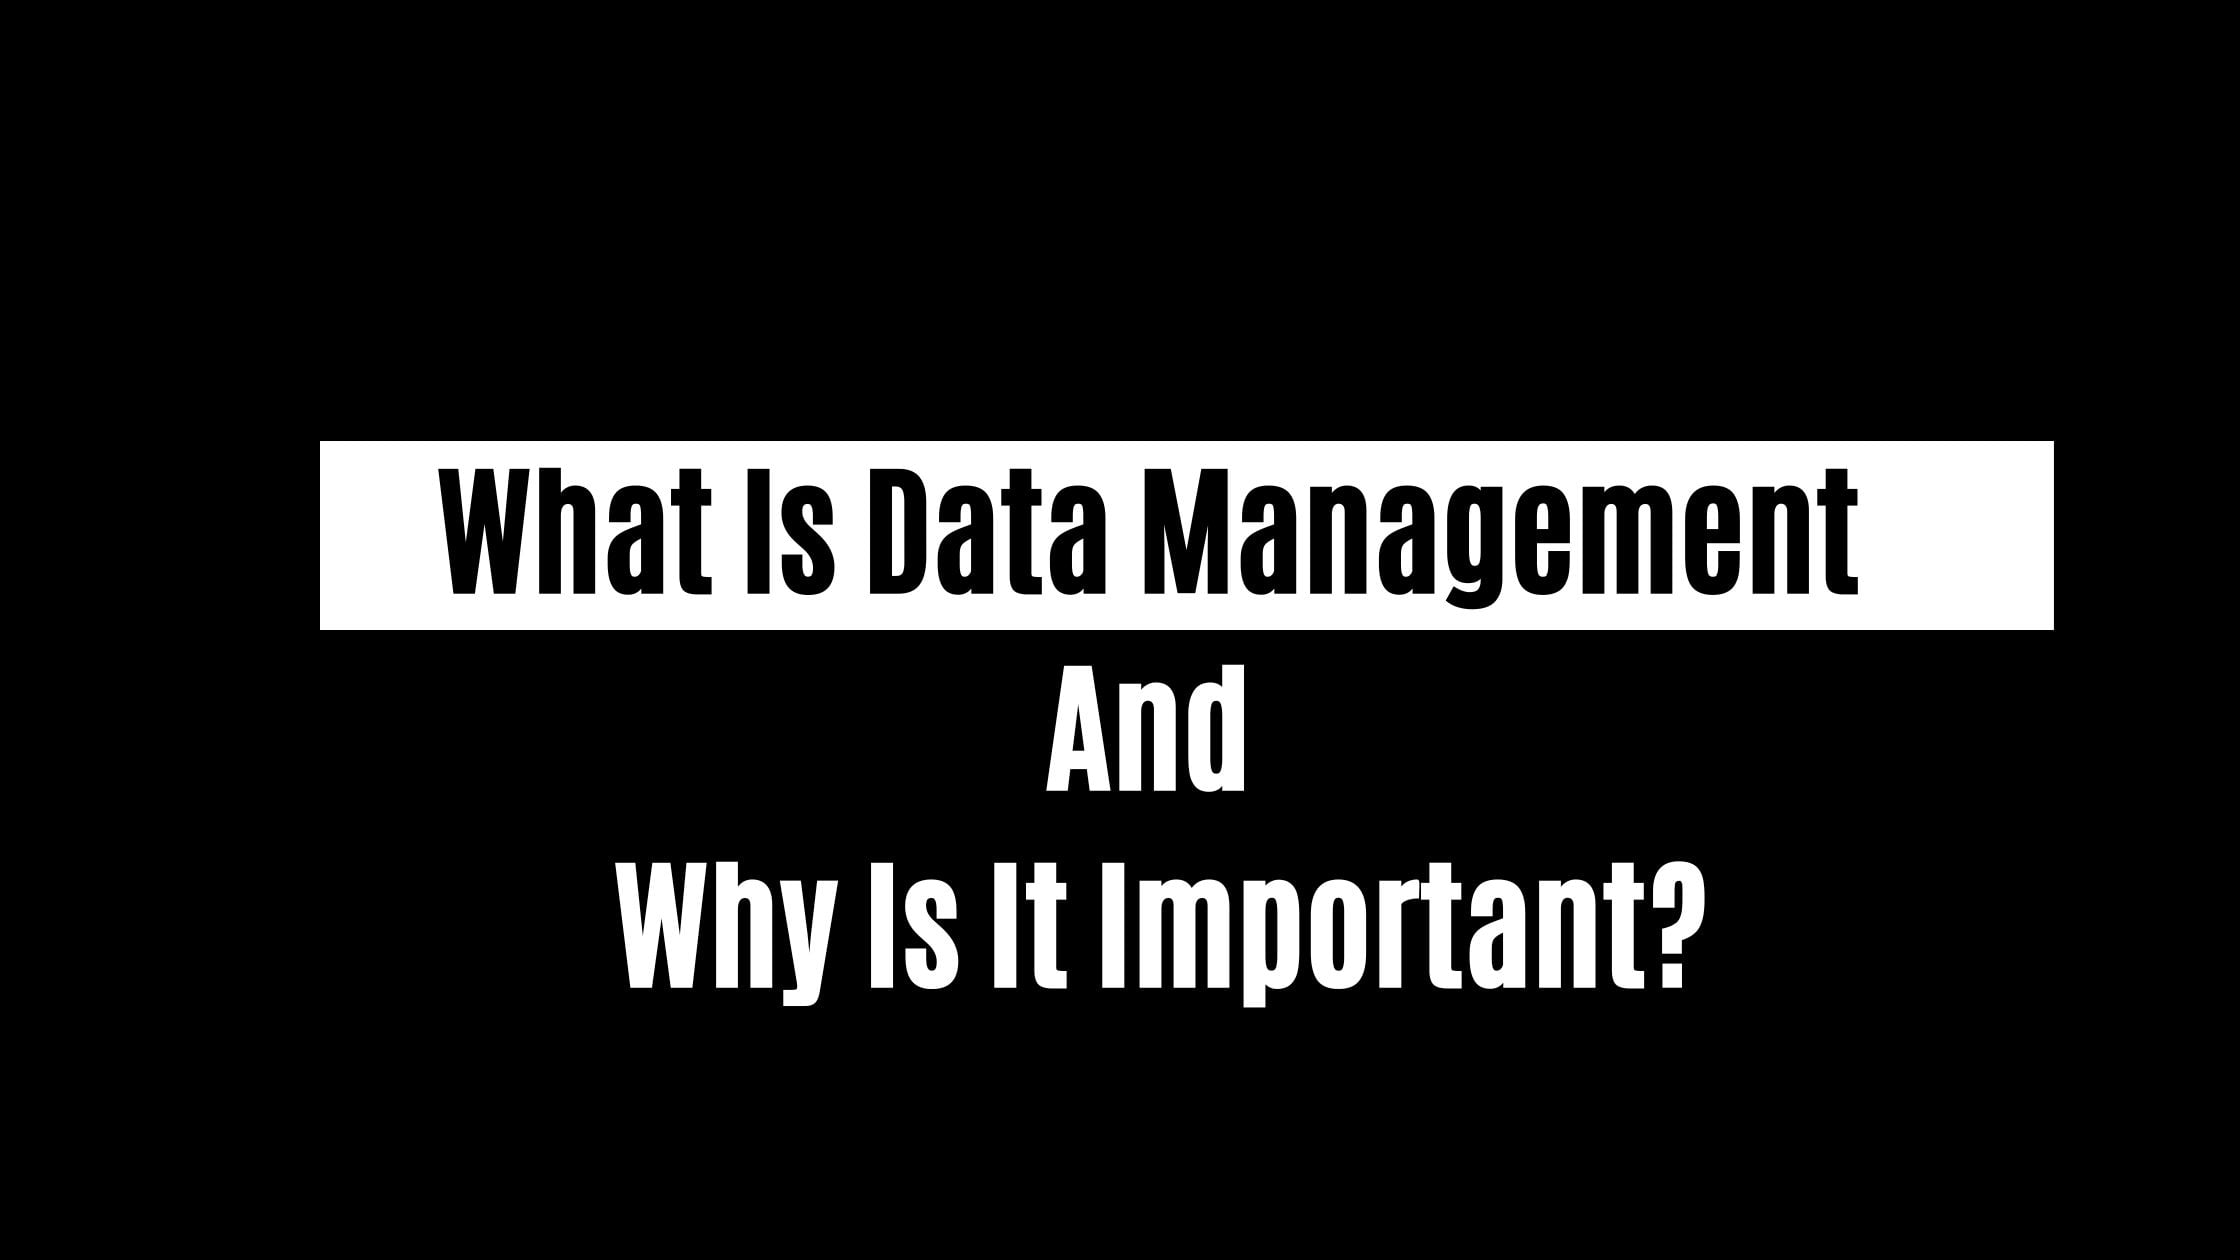 What Is Data Management And Why Is It Important